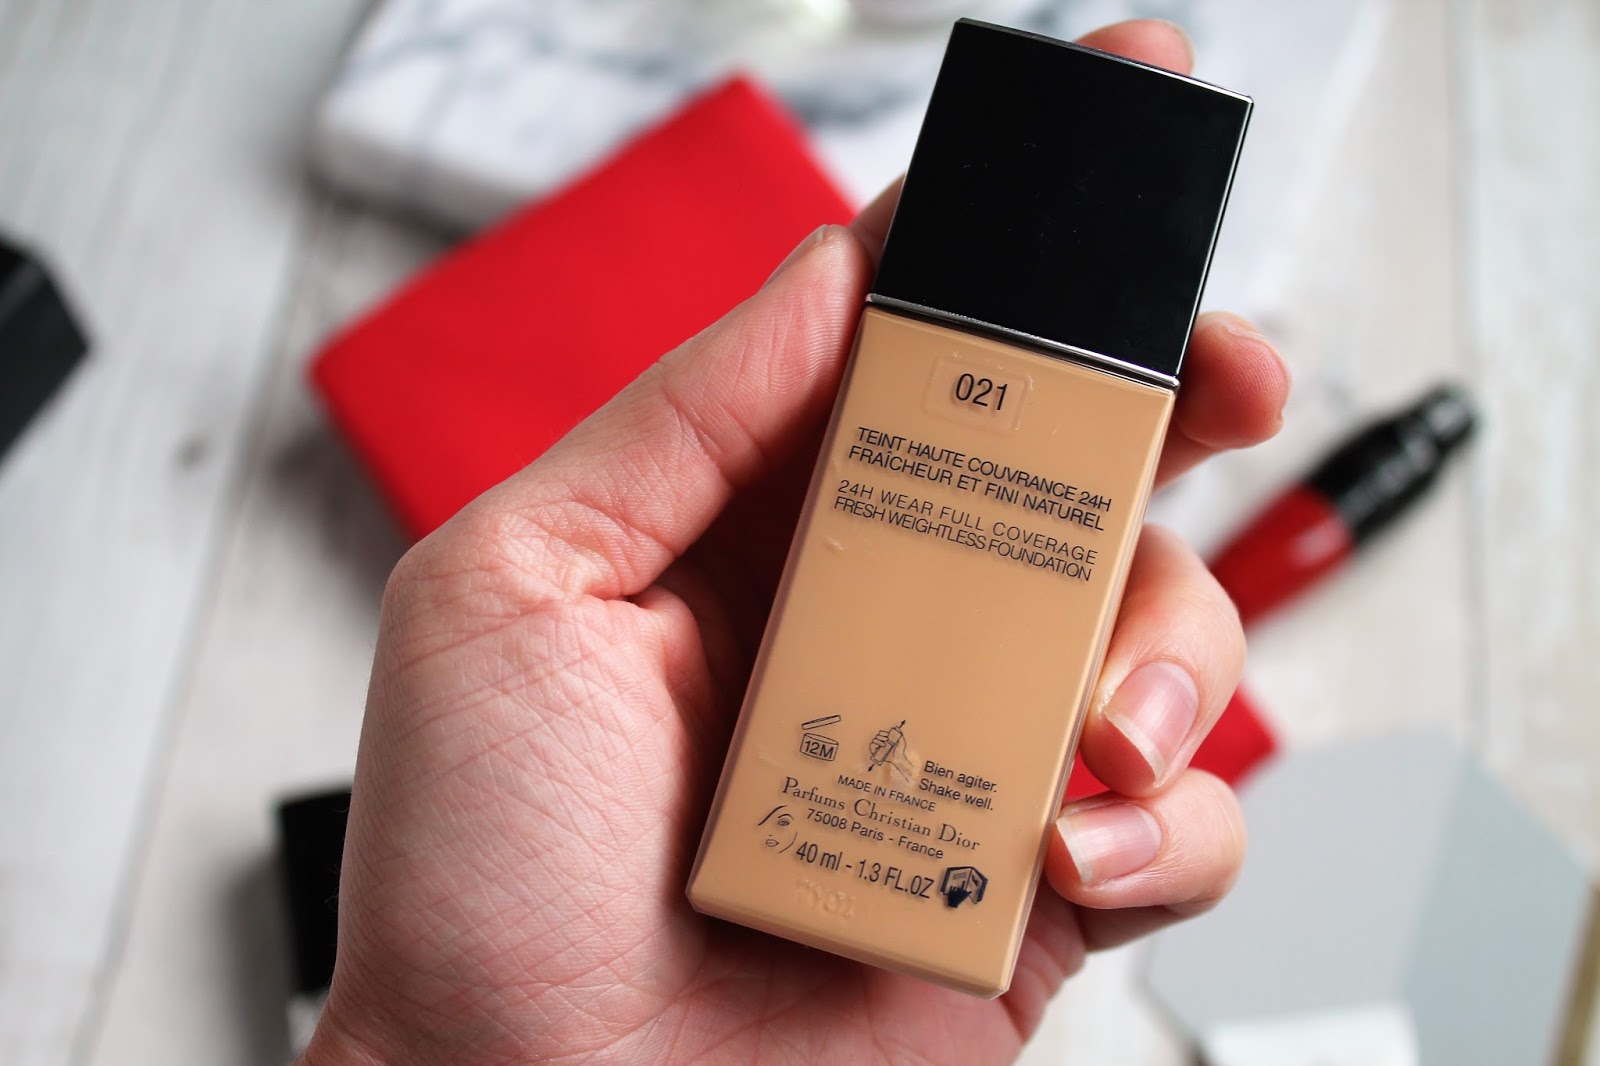 dior foundation undercover review